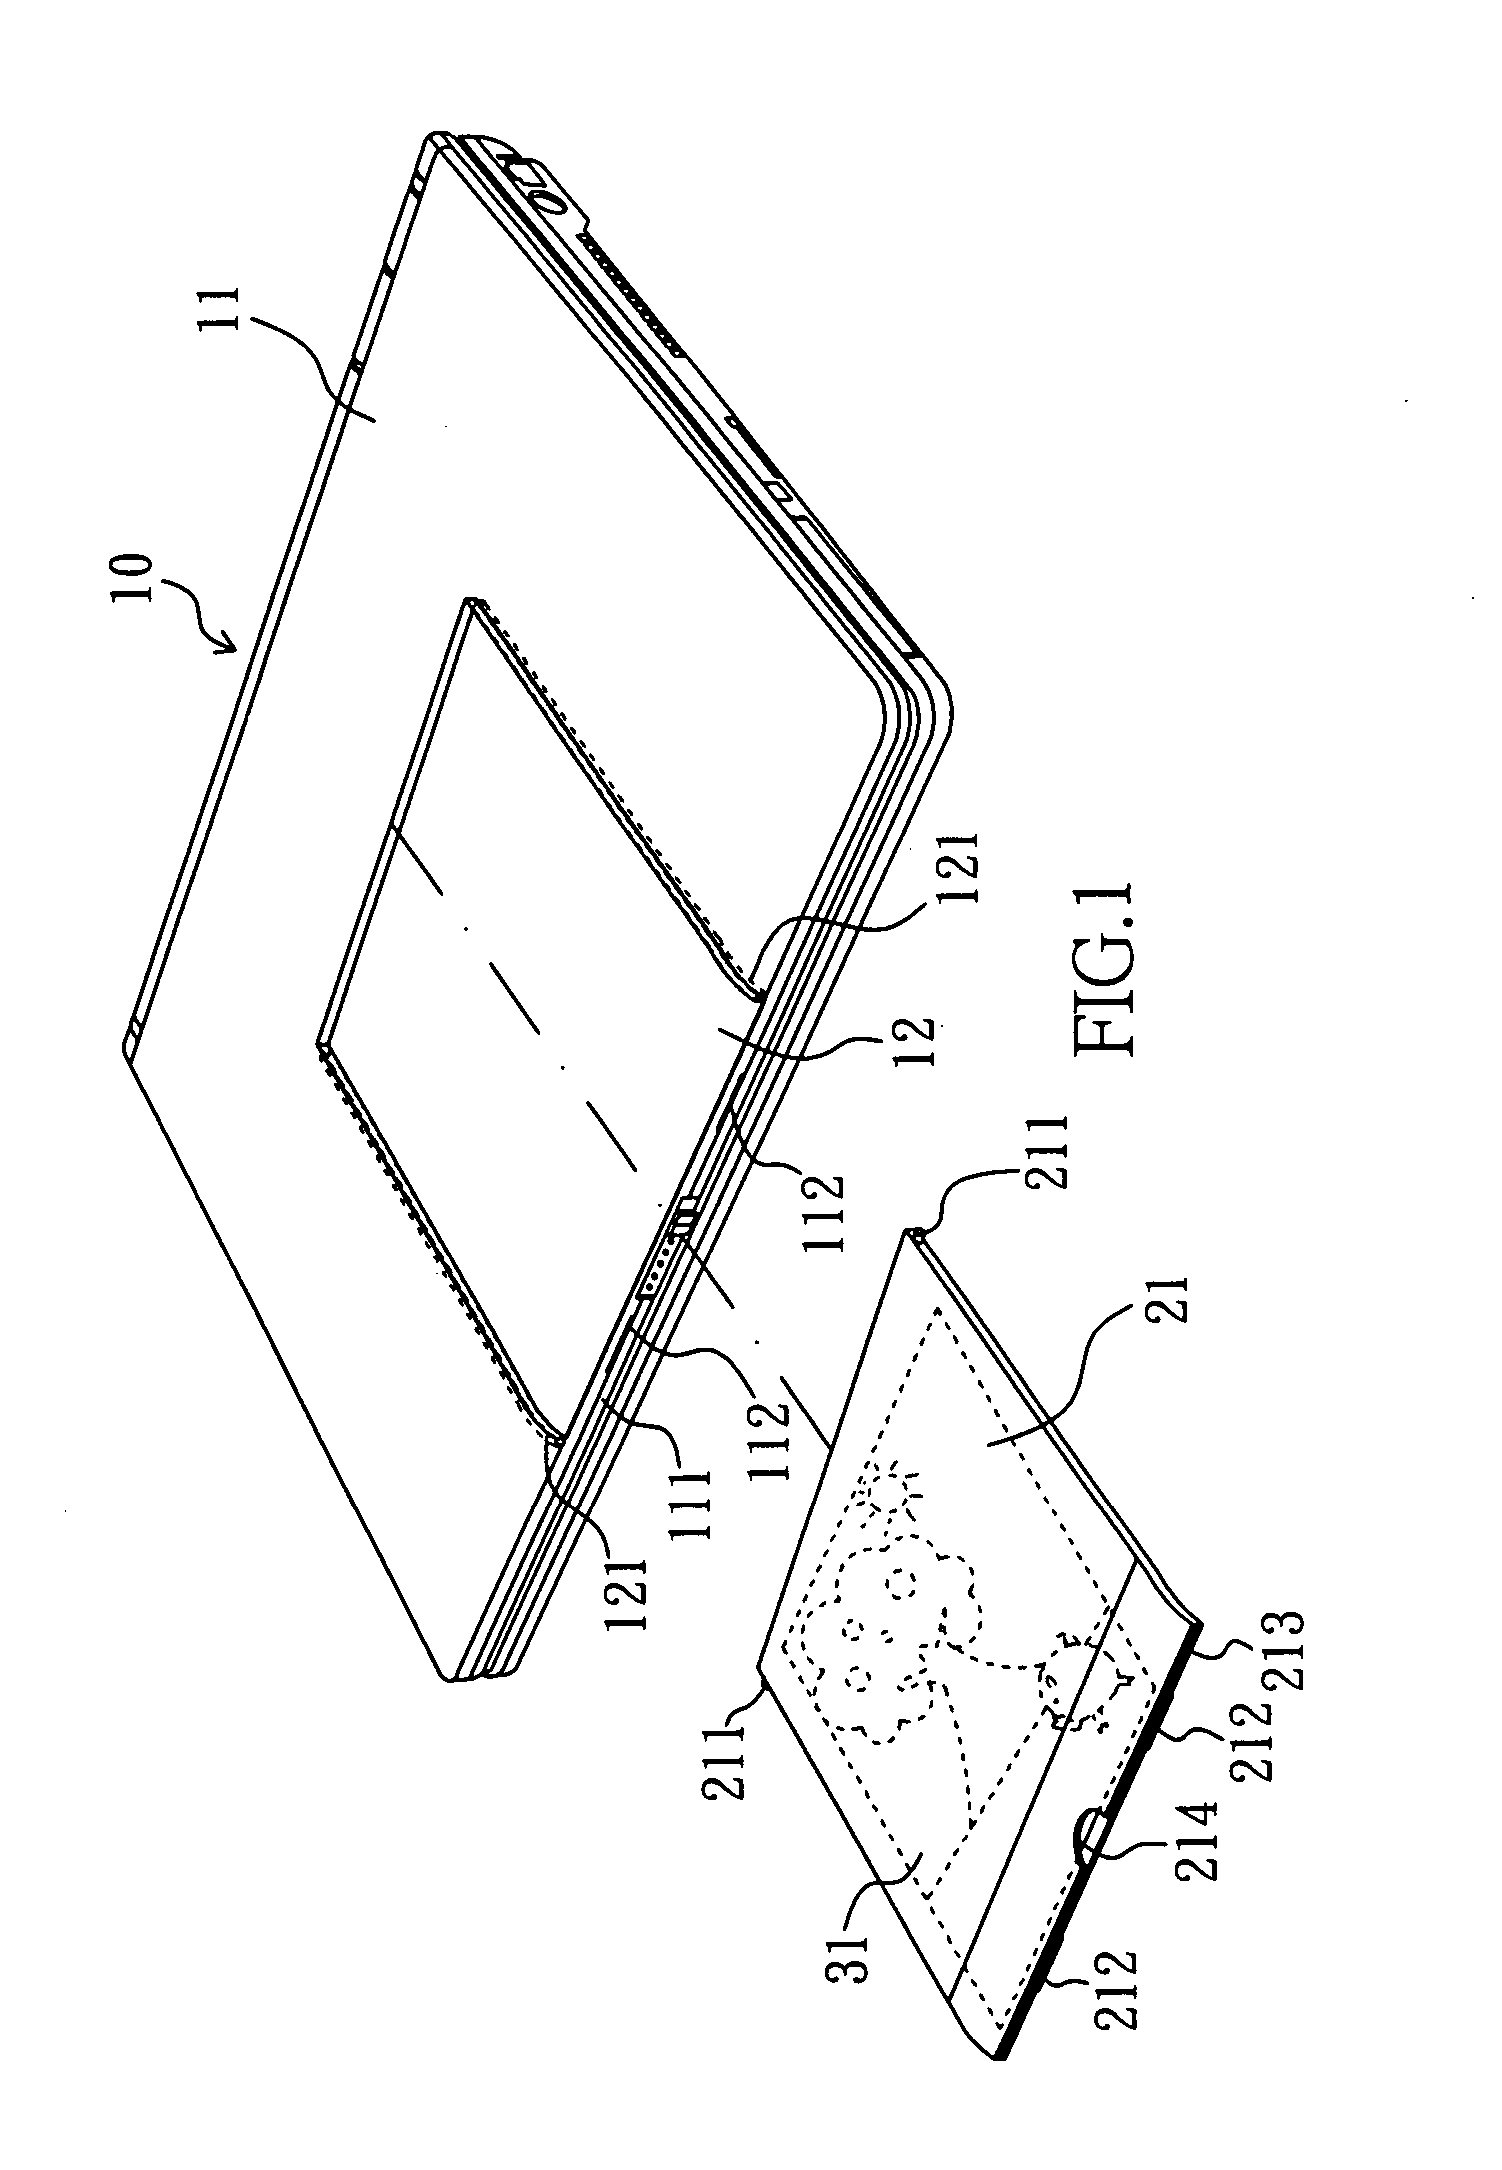 Rereconfigurable structure for panel of portable personal computer